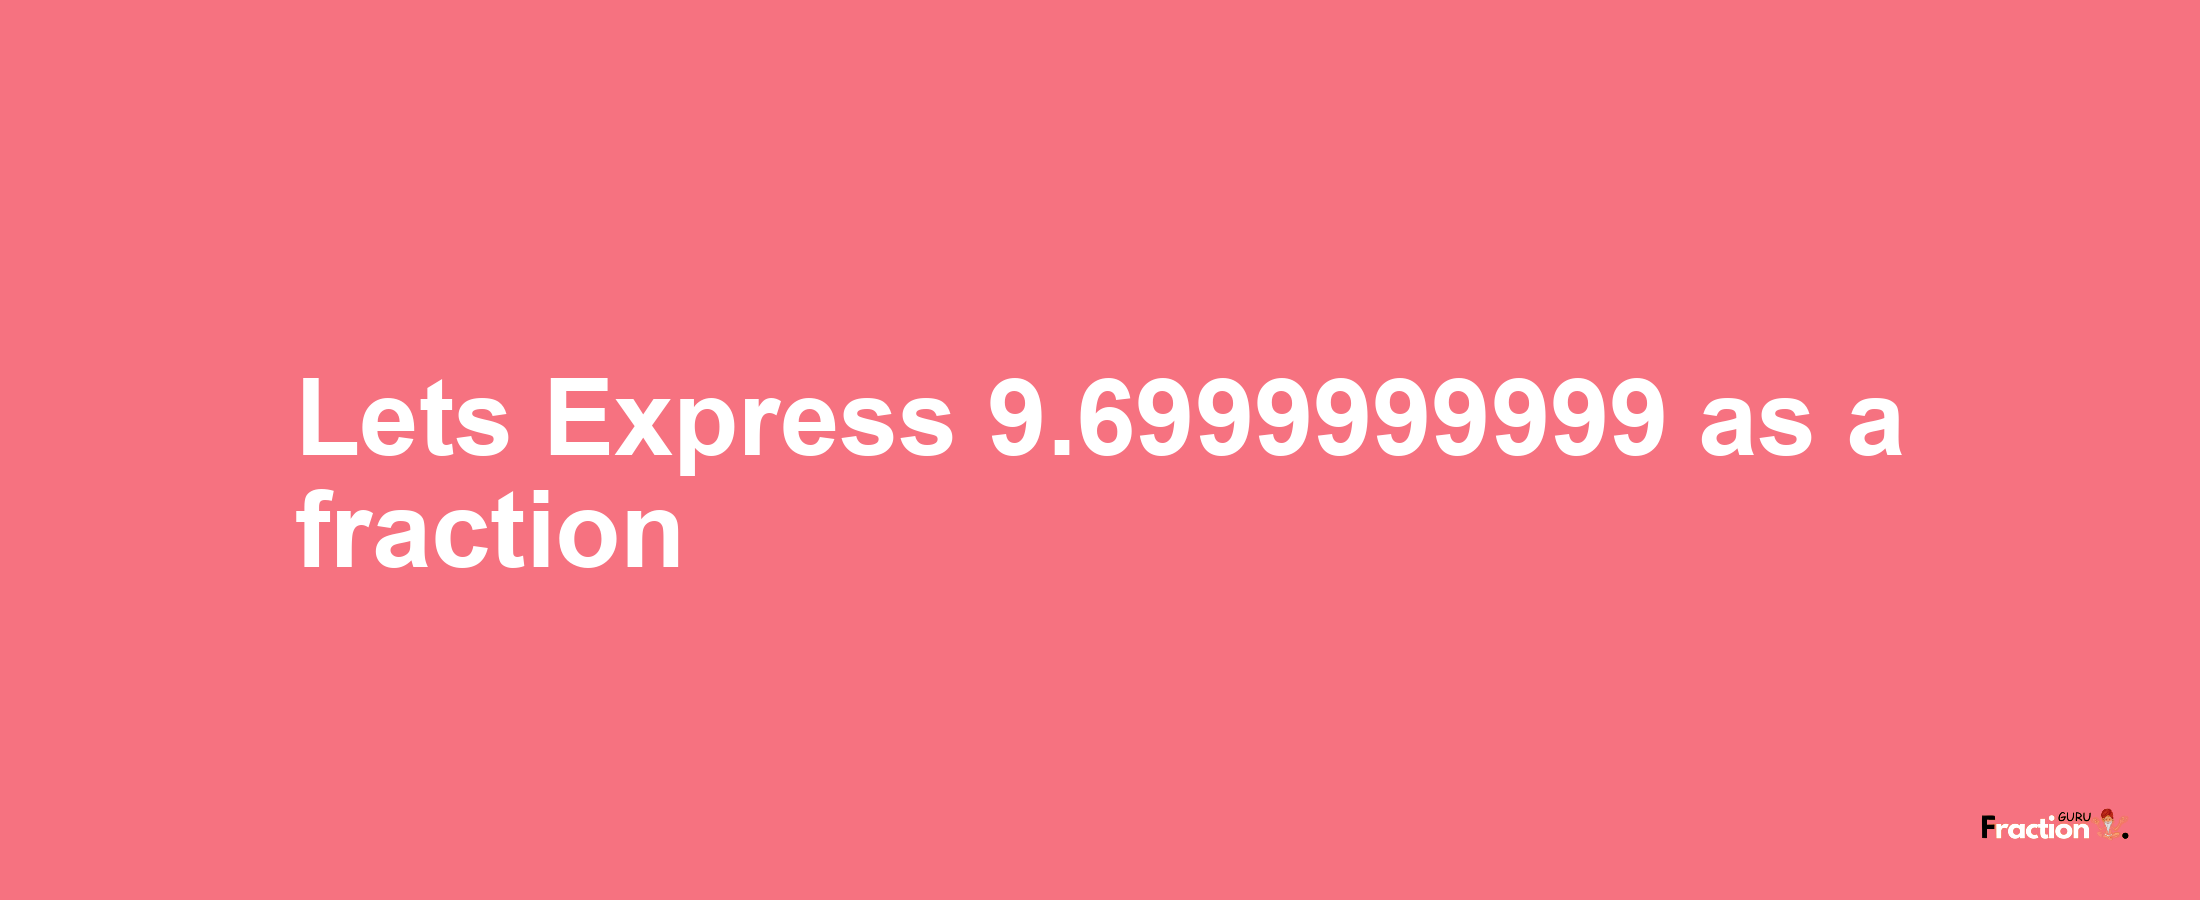 Lets Express 9.6999999999 as afraction